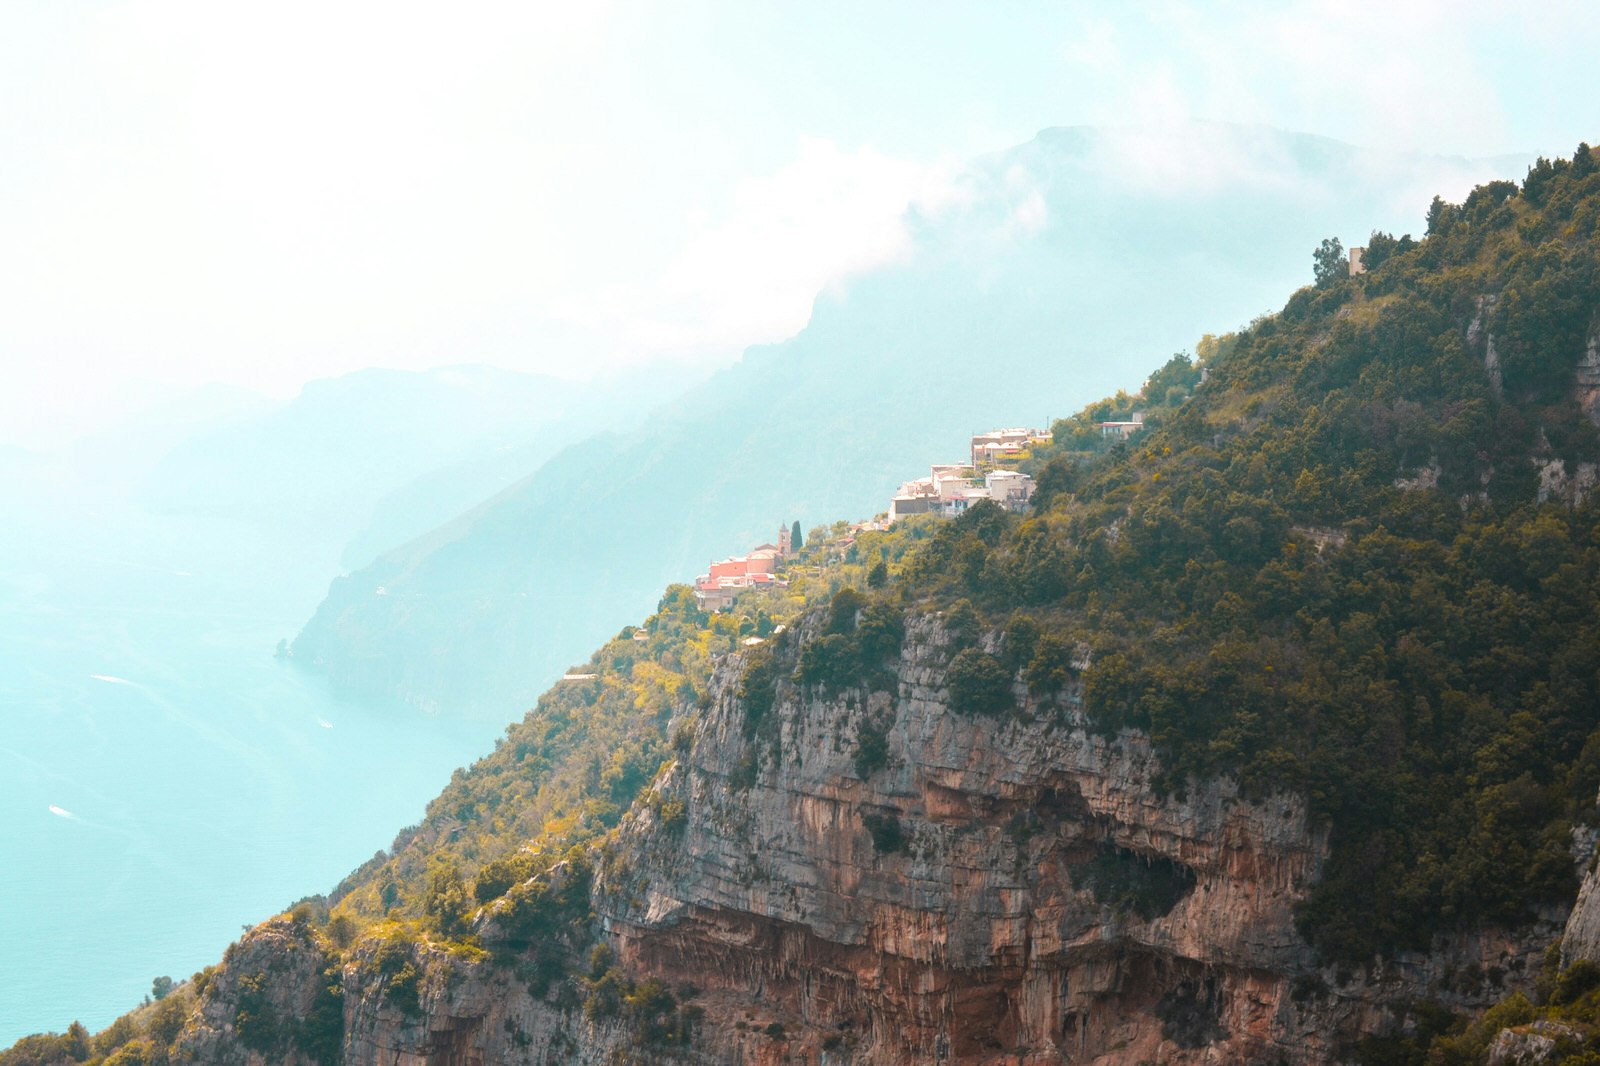 A photo of a hiking trail knows as Path of the Gods in Italy. Terracotta roofs are just about visible on the side of a forested mountain.